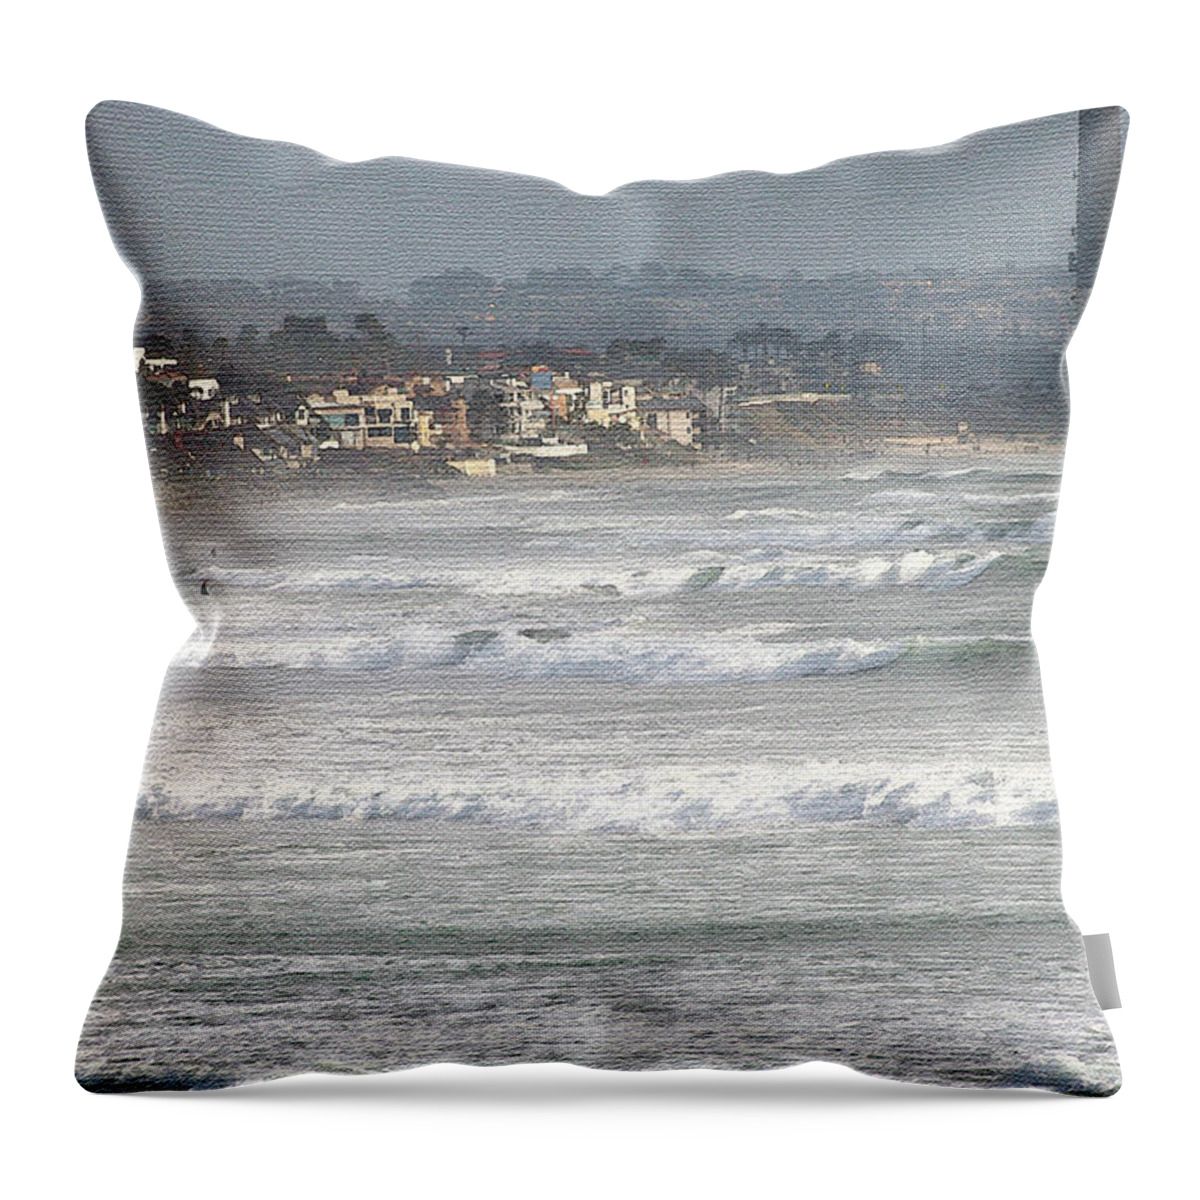 Oceanside California South From Pier Throw Pillow featuring the digital art Oceanside California South From Pier by Tom Janca